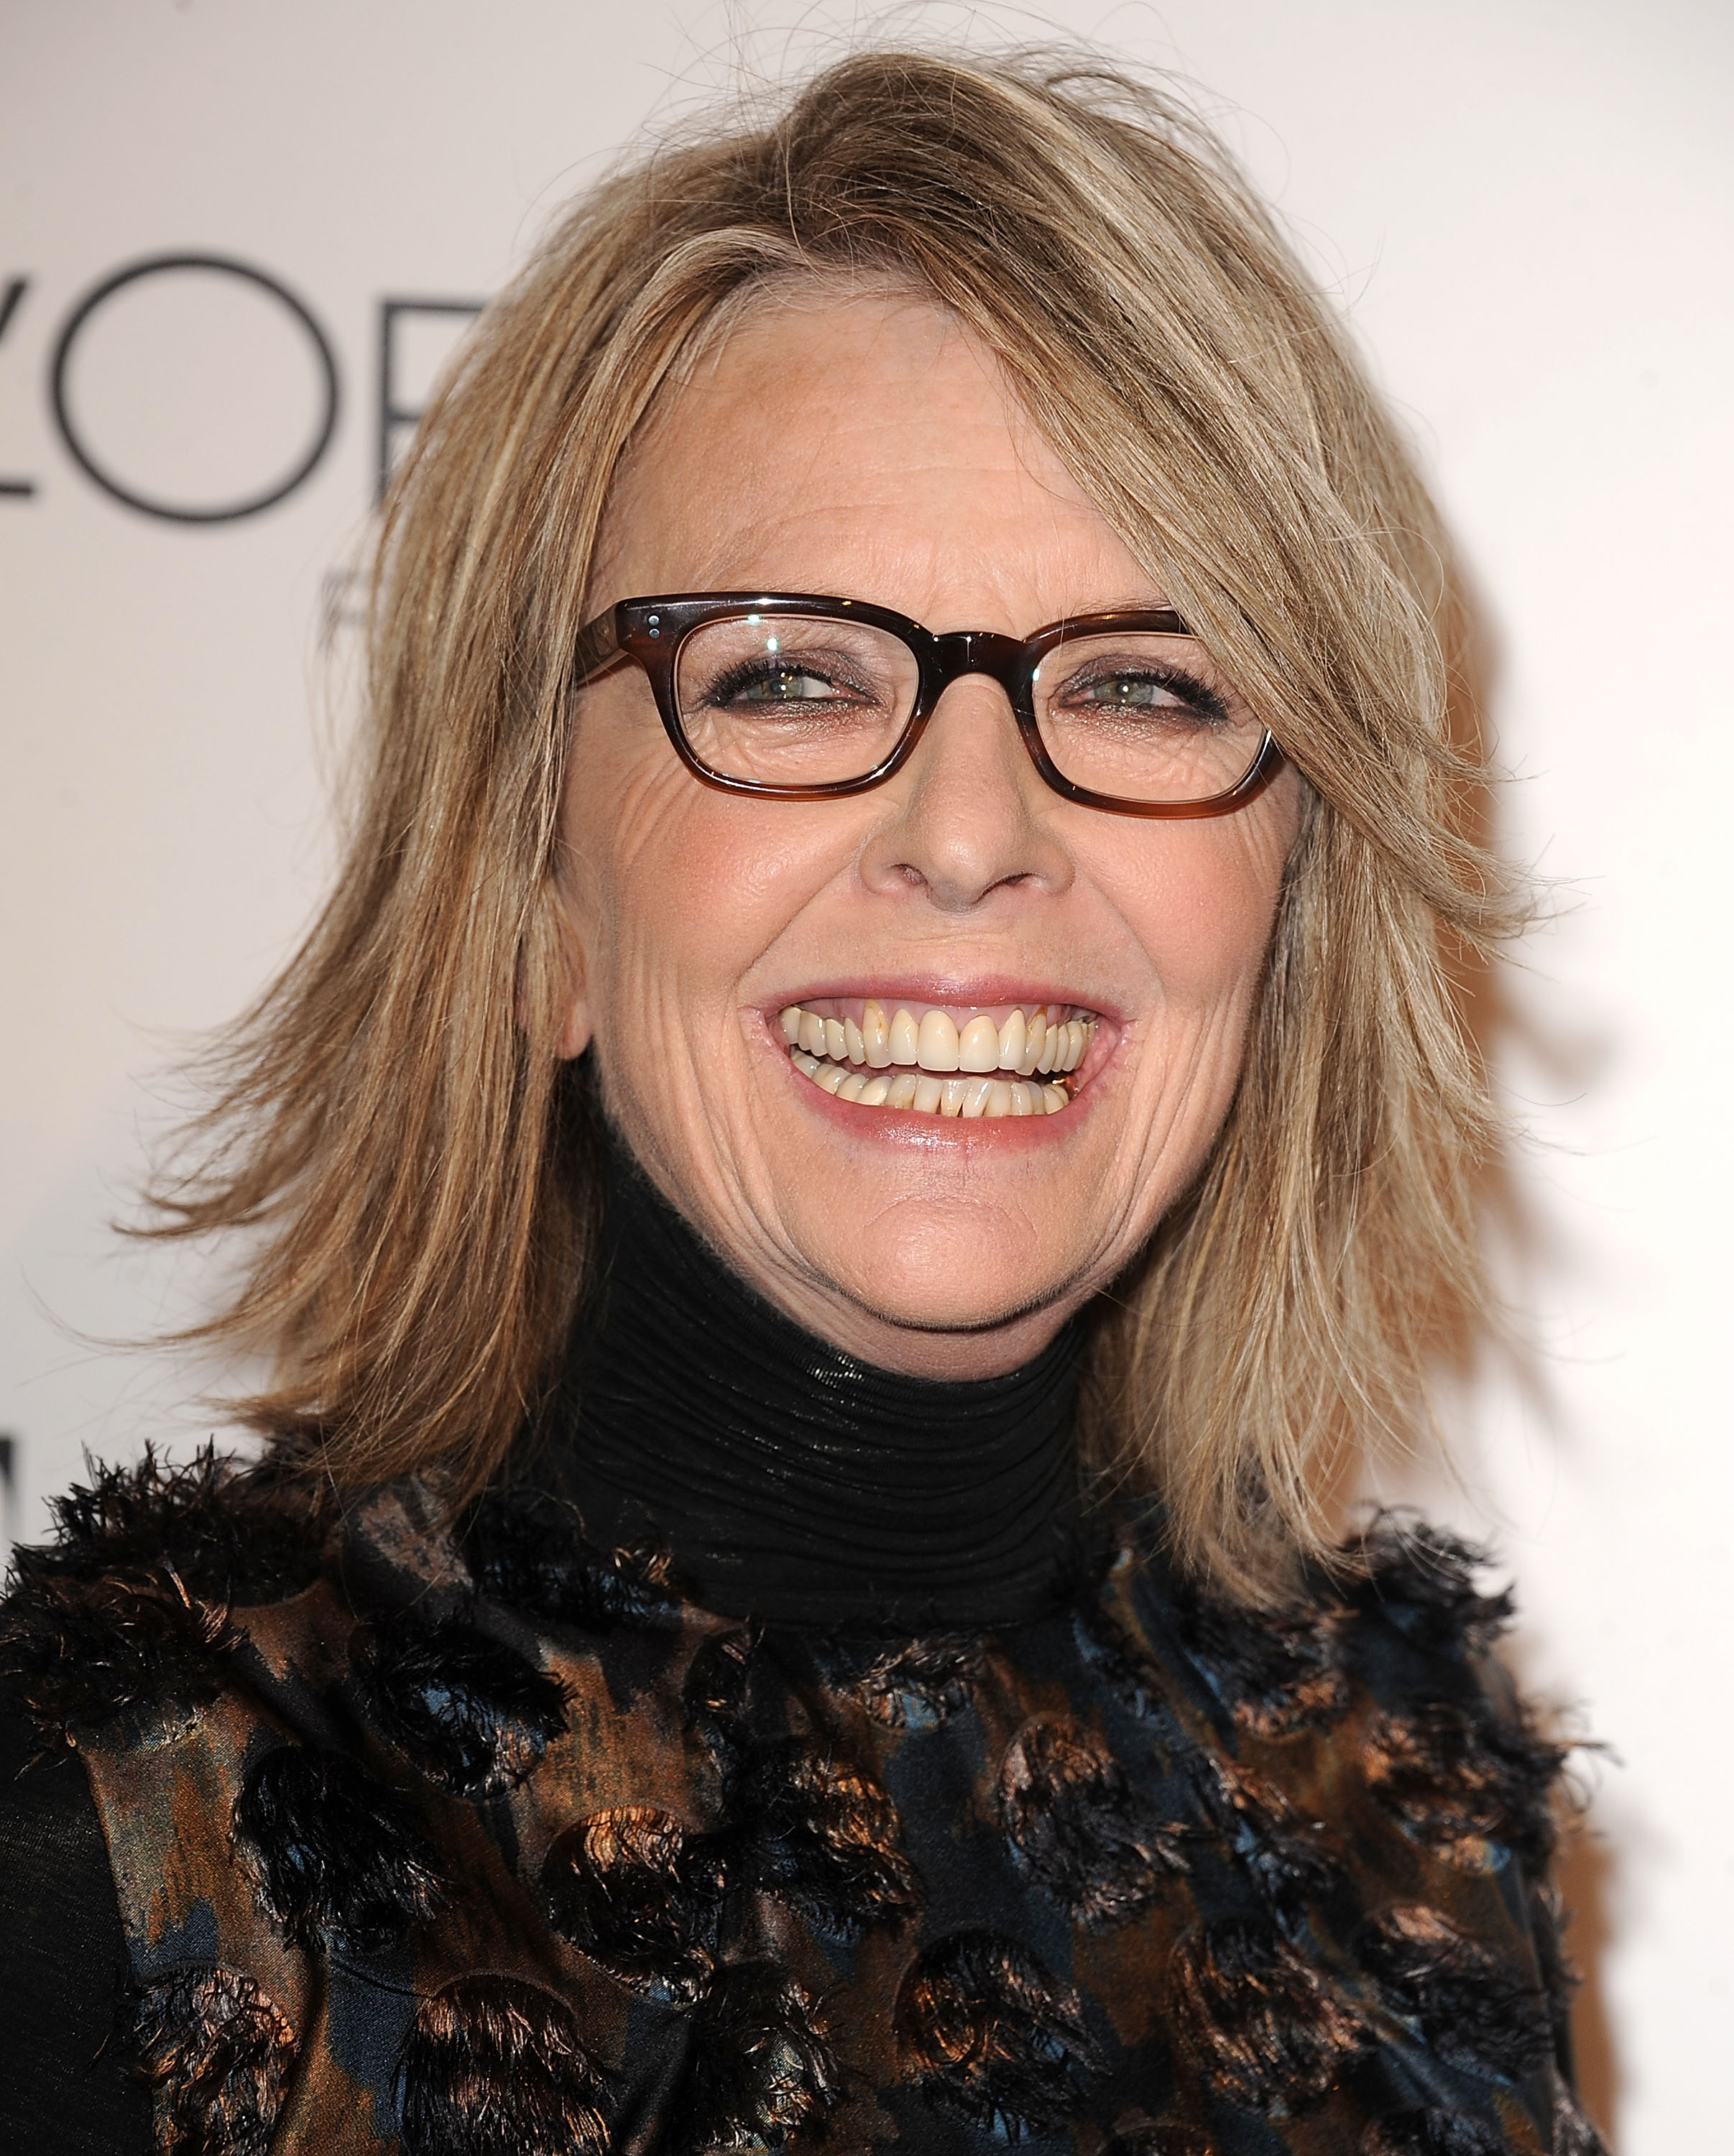 Diane Keaton attends ELLE's 17th Annual Women In Hollywood Tribute on October 18, 2010  | Source: Getty Images